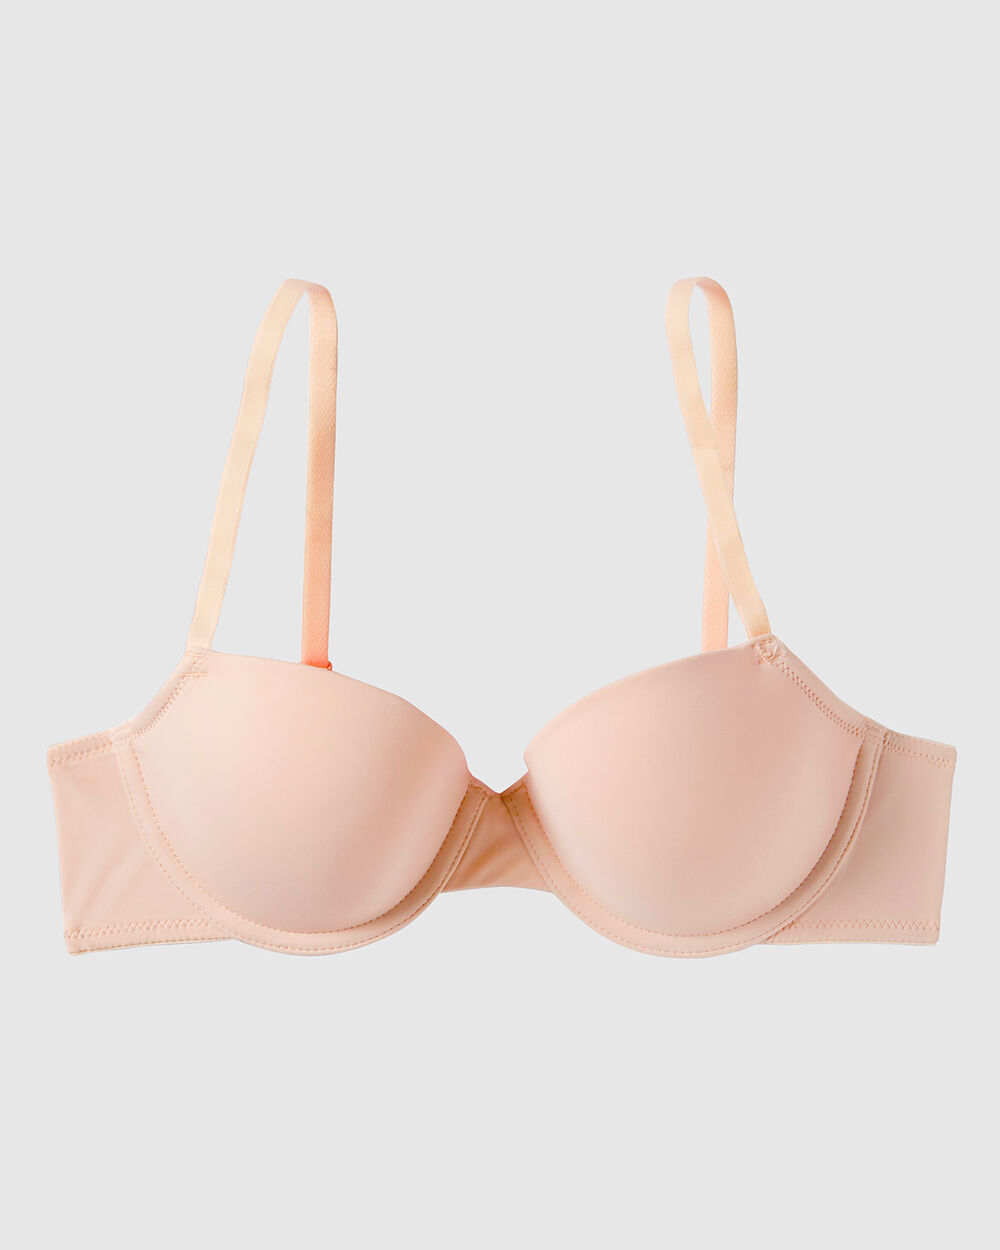 Now this is everything 💗 Our effortless Le Stretch Demi Bra